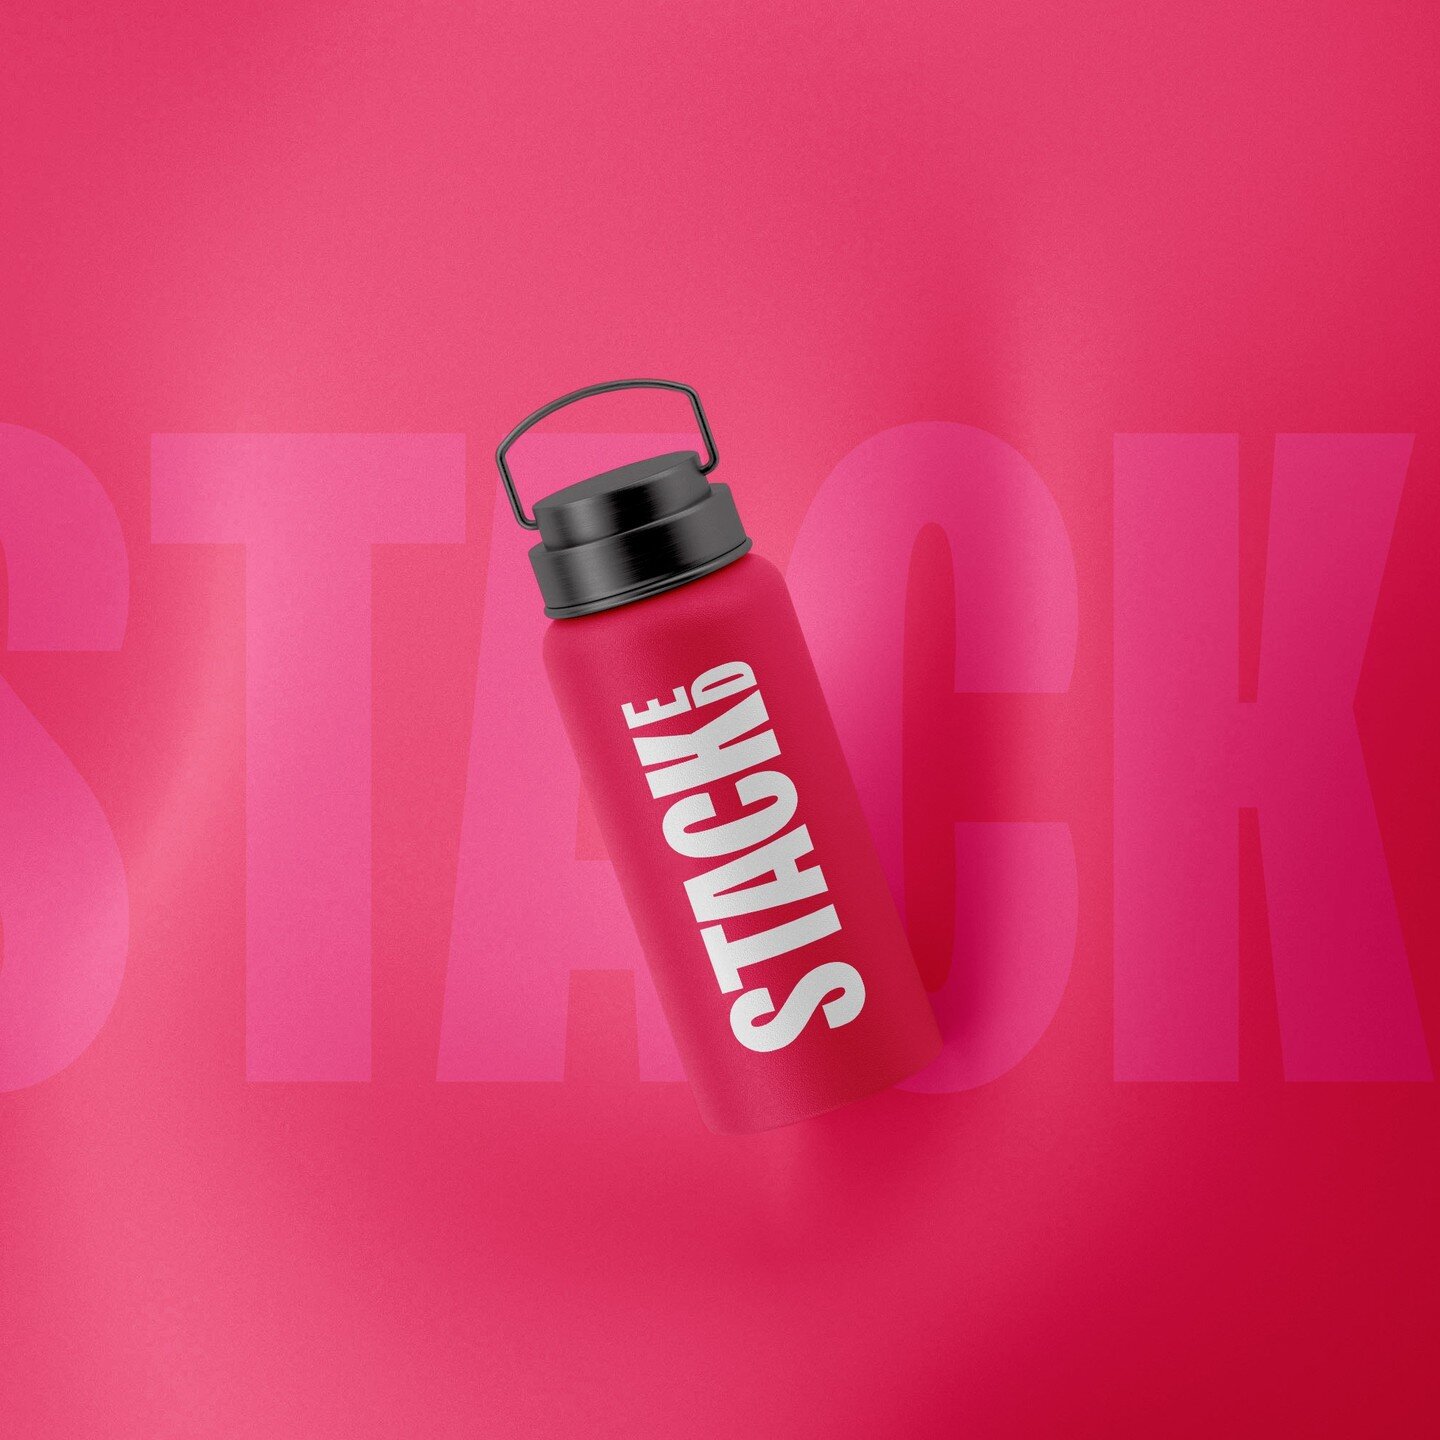 Fresh work: We've spent the last few months working with our friends at the STACKED &mdash; a boutique digital marketing agency in Chicago &mdash; developing their new brand identity. Full case study coming soon!

What we did:
Mini Brand Audit
Messag